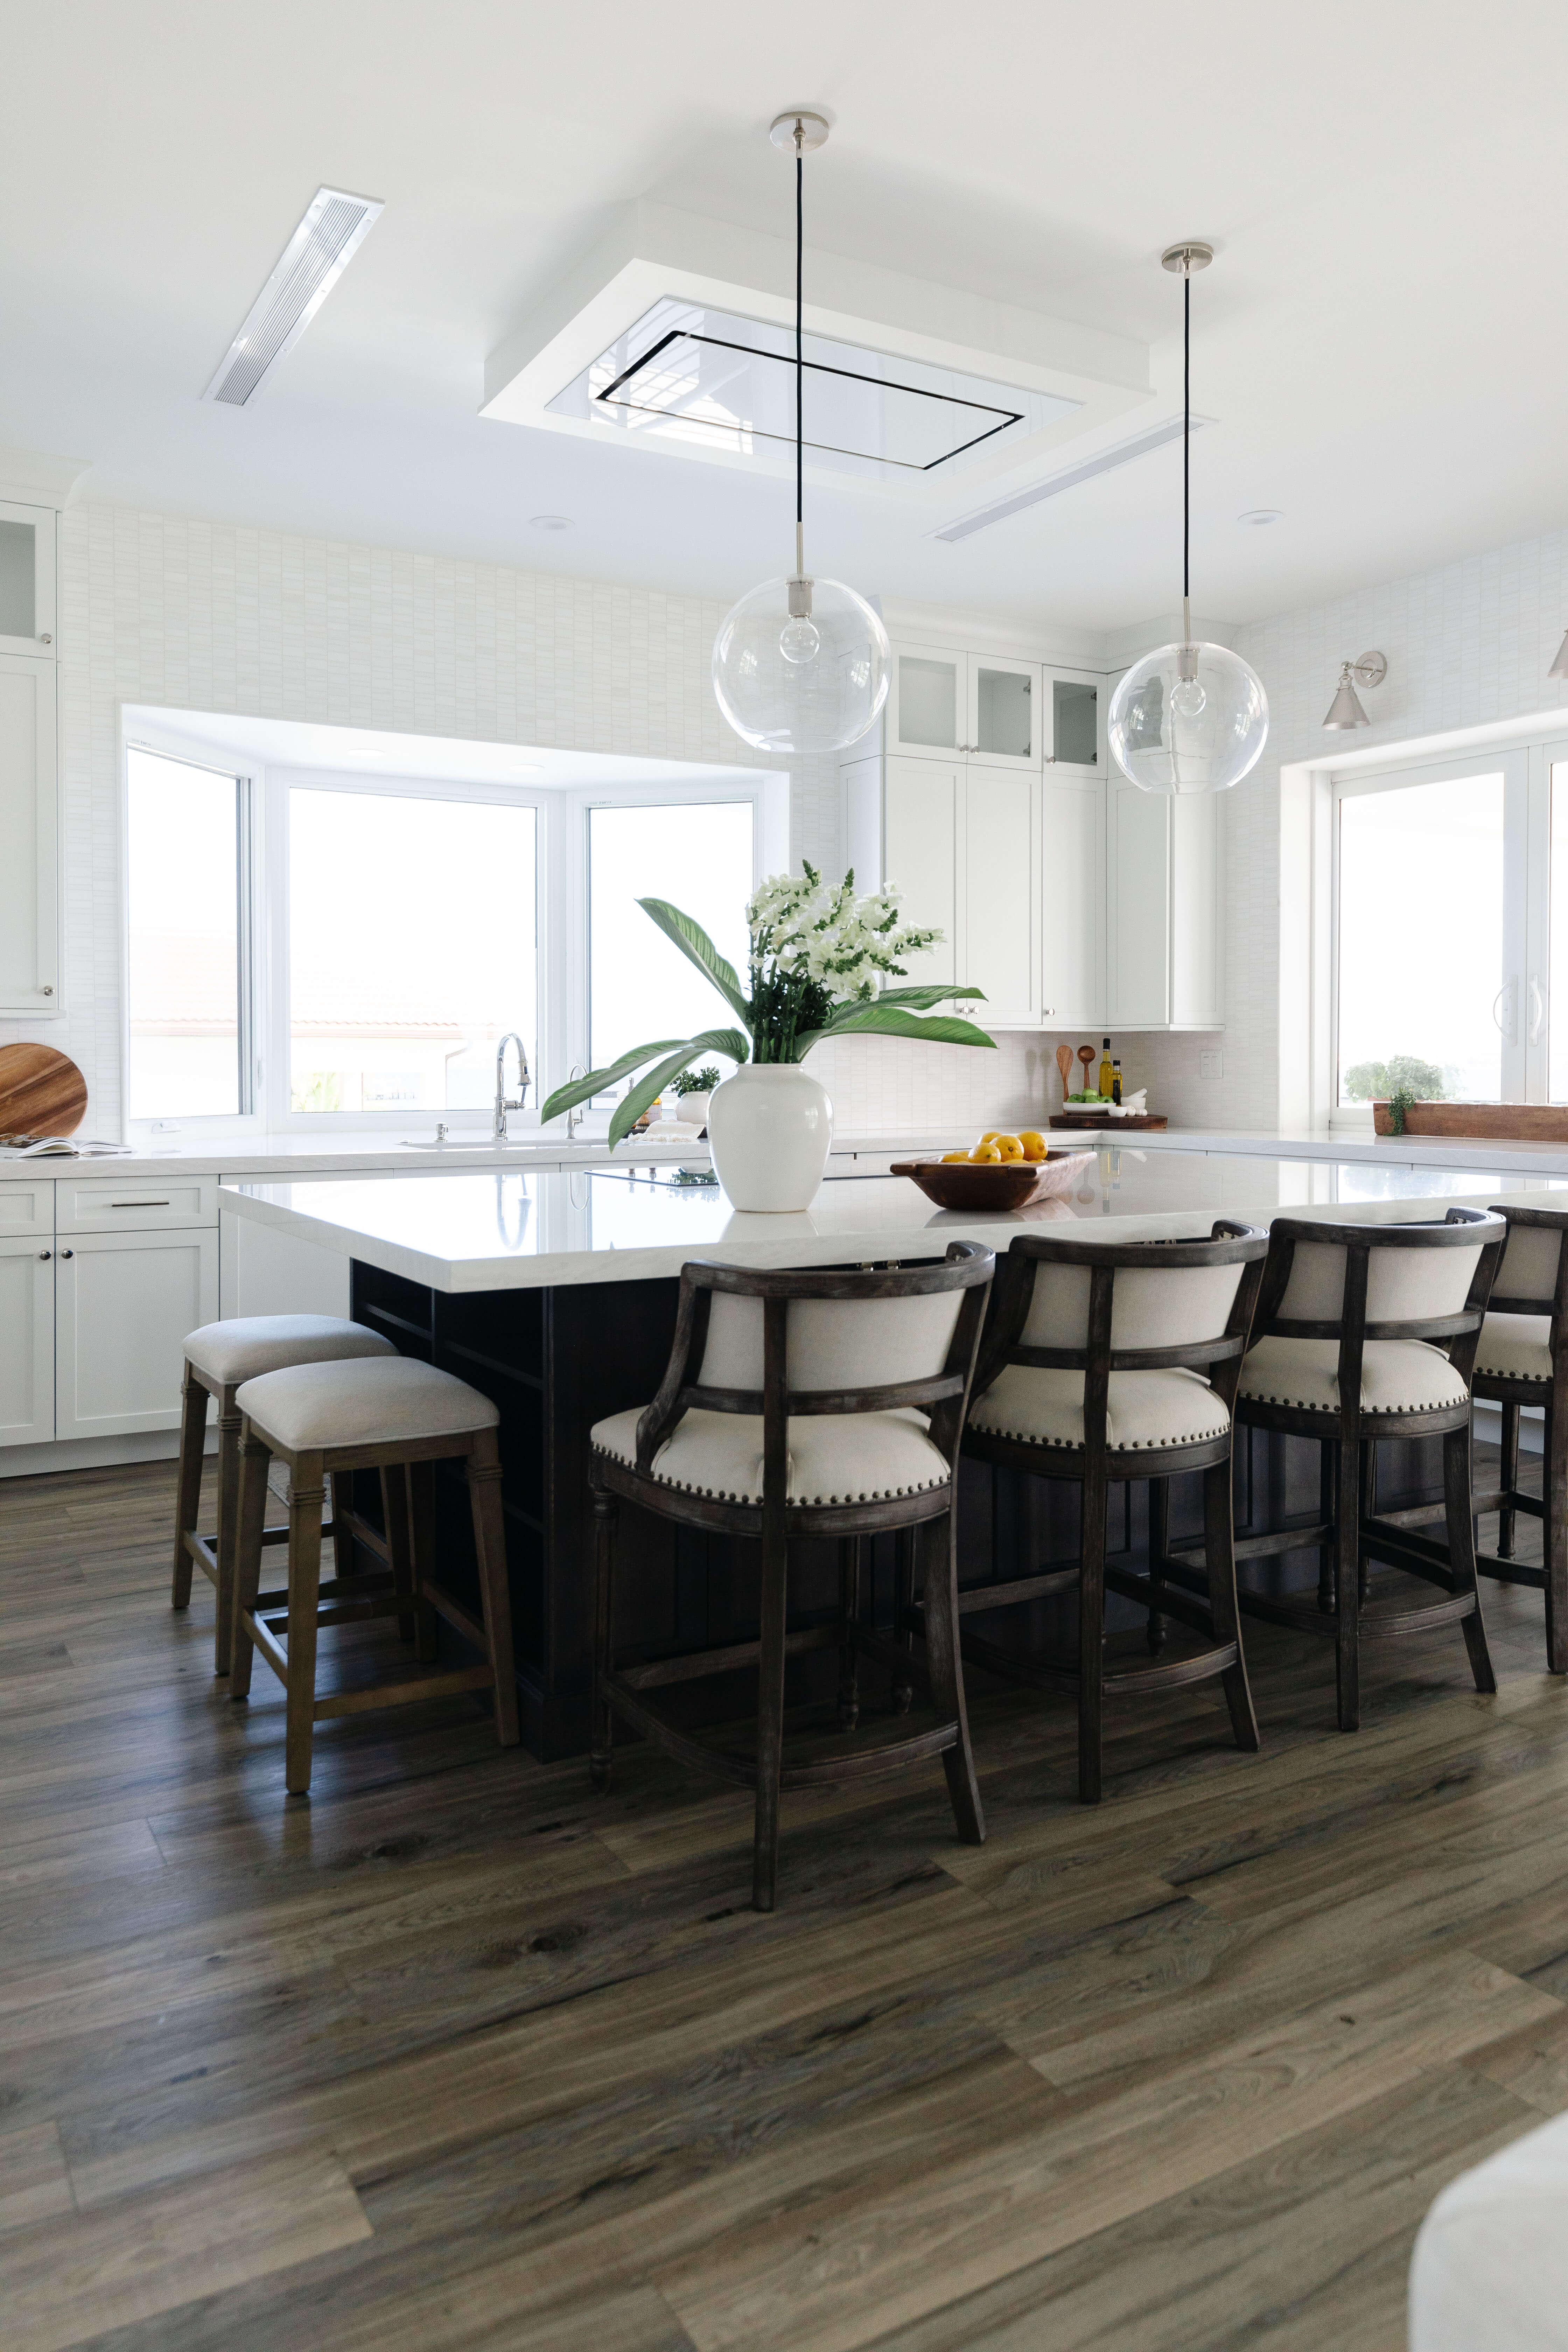 A black and white kitchen design with a beautiful kitchen island the also works as a casual dining room table.